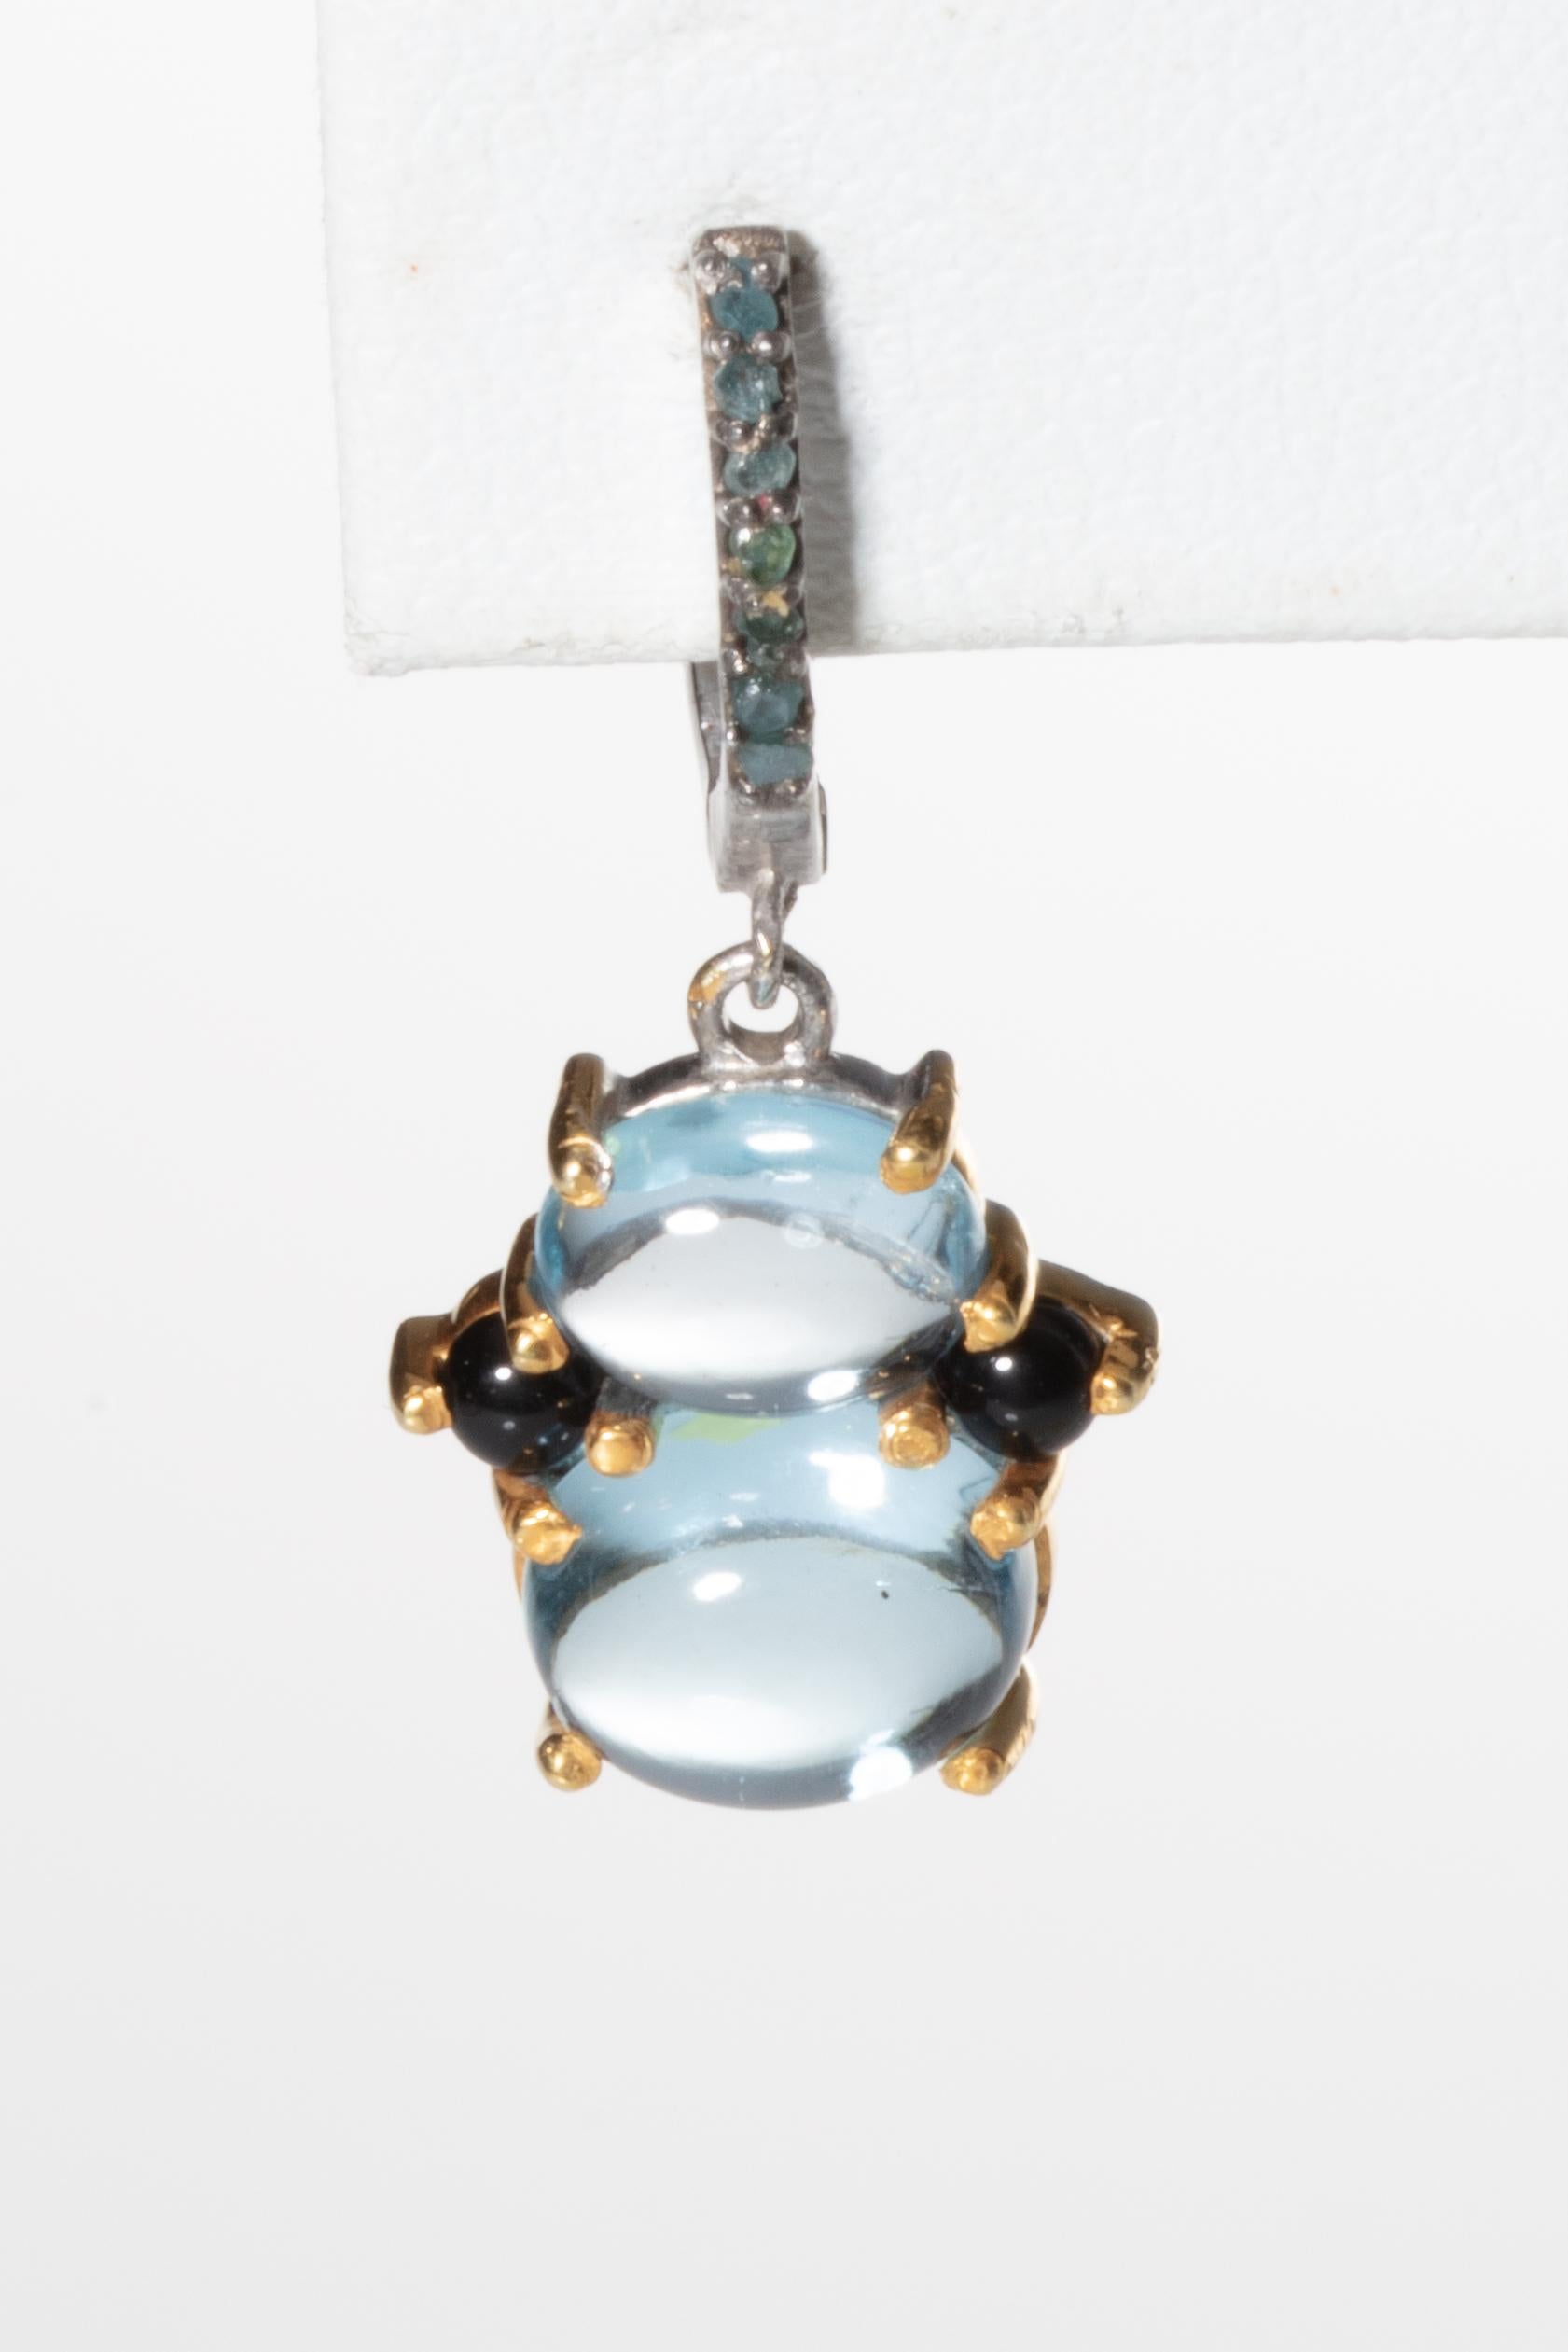 Double-drop cabochon aquamarine earrings flanked by two cabochon sapphires held with 18K gold bezels on a sterling frame.  The post is a loop of pave`-set diamonds on a sterling French clip for pierced ears.  Weight of diamonds is 1 carat and the